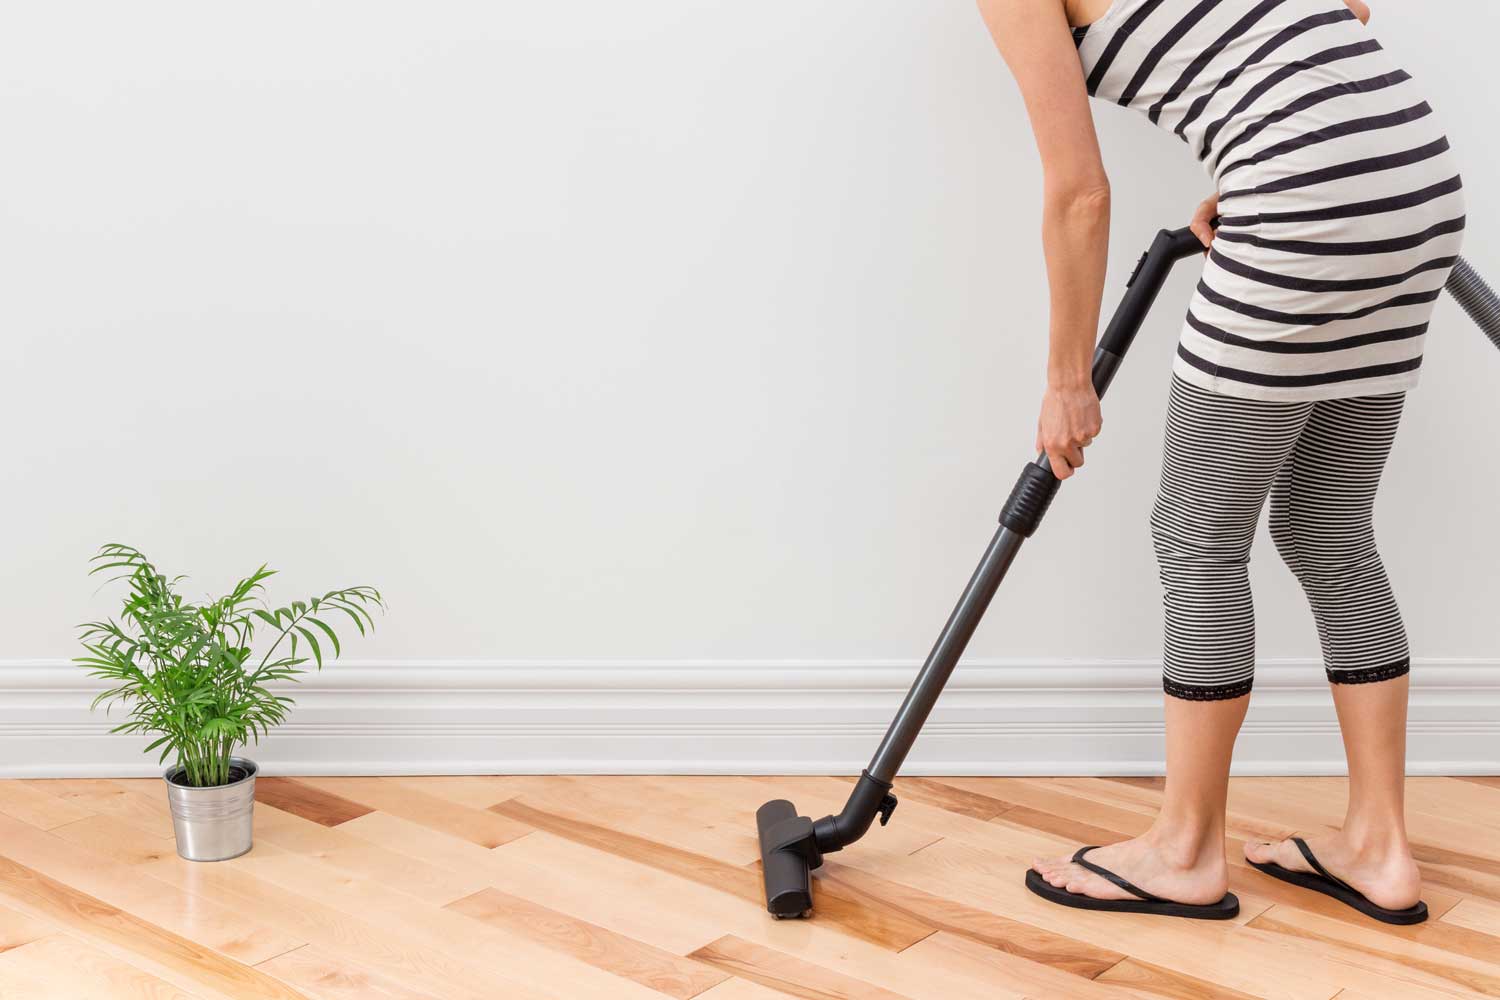 Regulary vacuum or sweep floors to remove dirt and keep your home floors looking amazing - tips from Footprints Floors in Chandler / Gilbert.